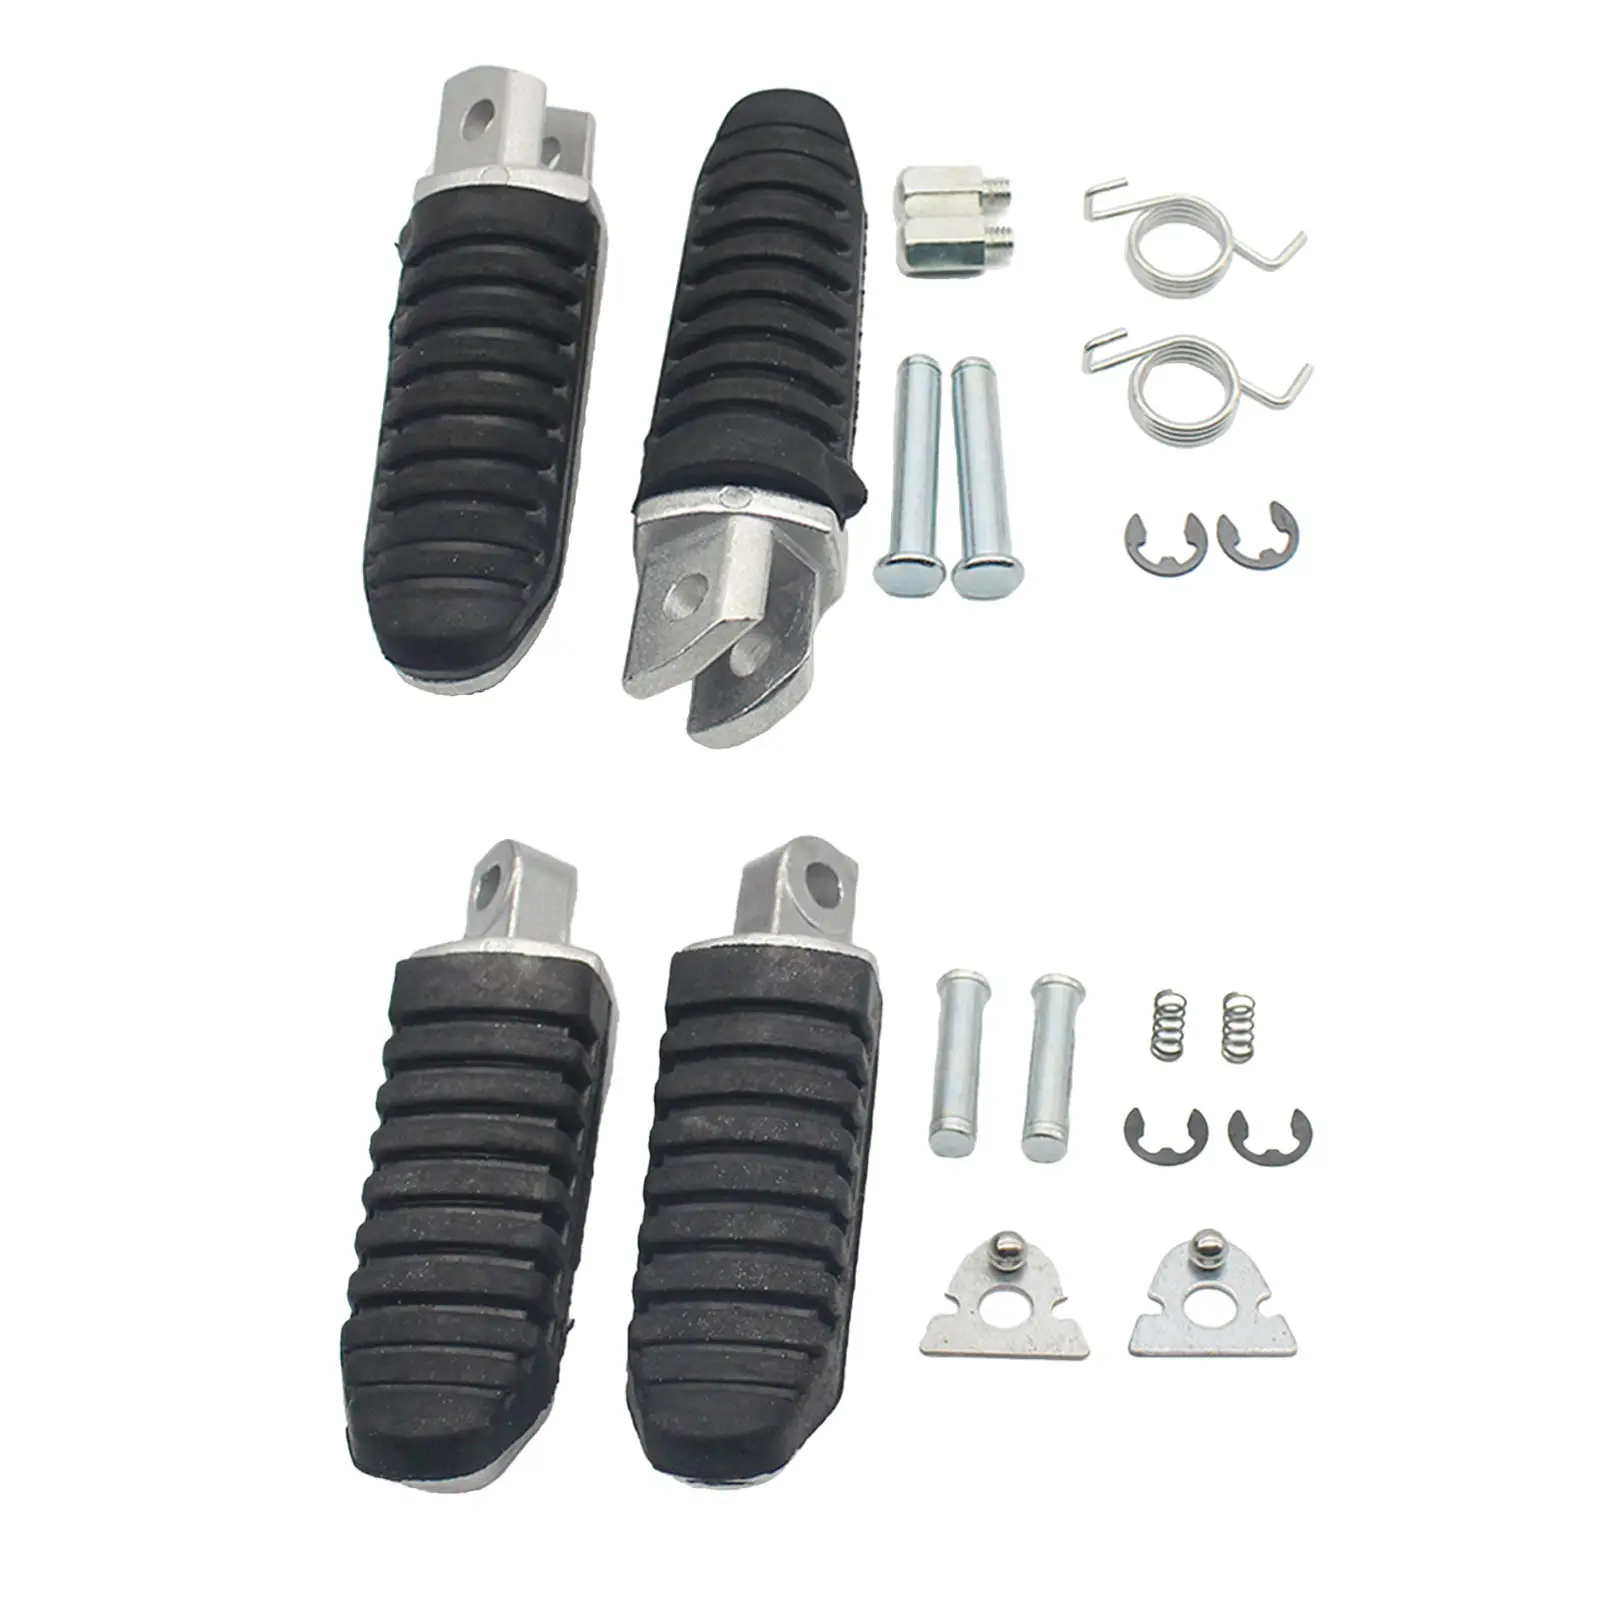 Aluminum Motorcycles Foot Pegs Foot Rest Pedals for Suzuki V-Strom 650F Motorcycle Replacement Part